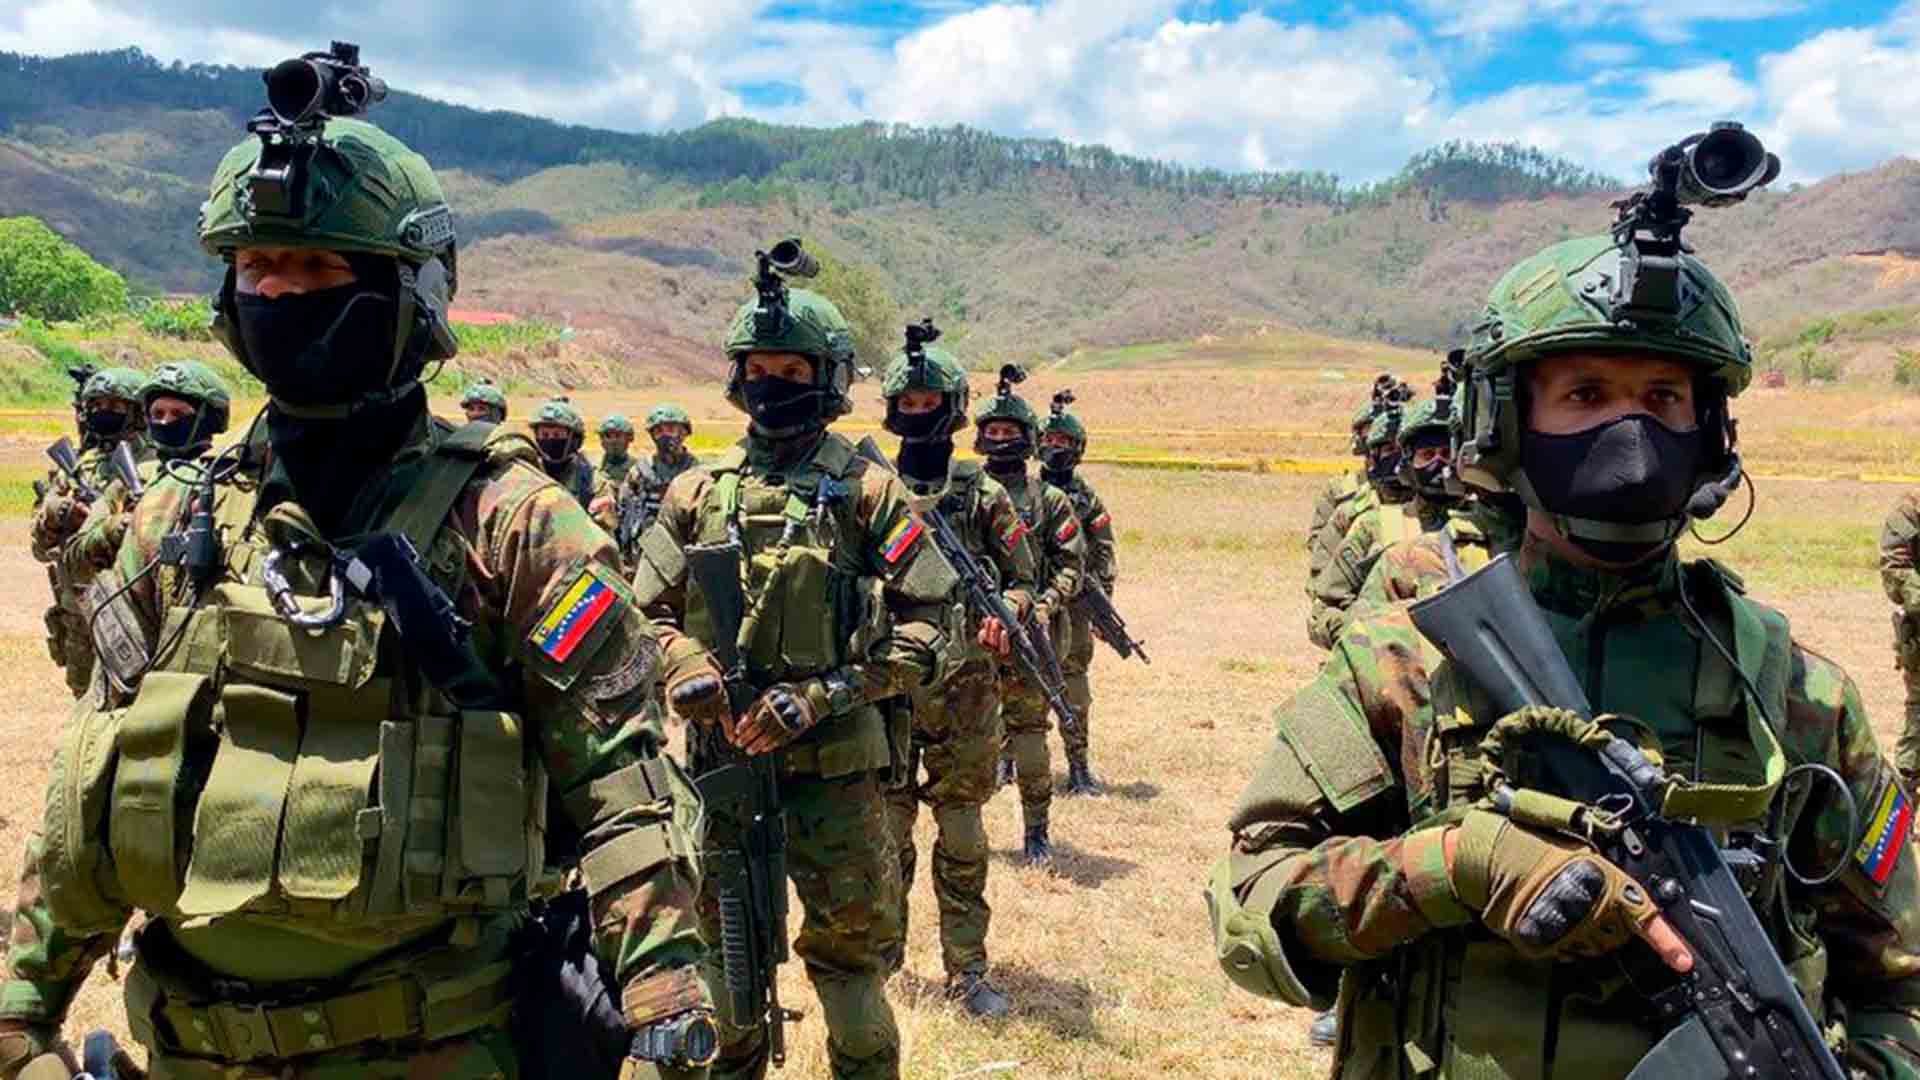 Featured image: Venezuelan army commandos deployed in the border area with Colombia where Colombian paramilitary gangs spread chaos and violence on a regular basis. Photo: Twitter/@CEOFANB/File photo.